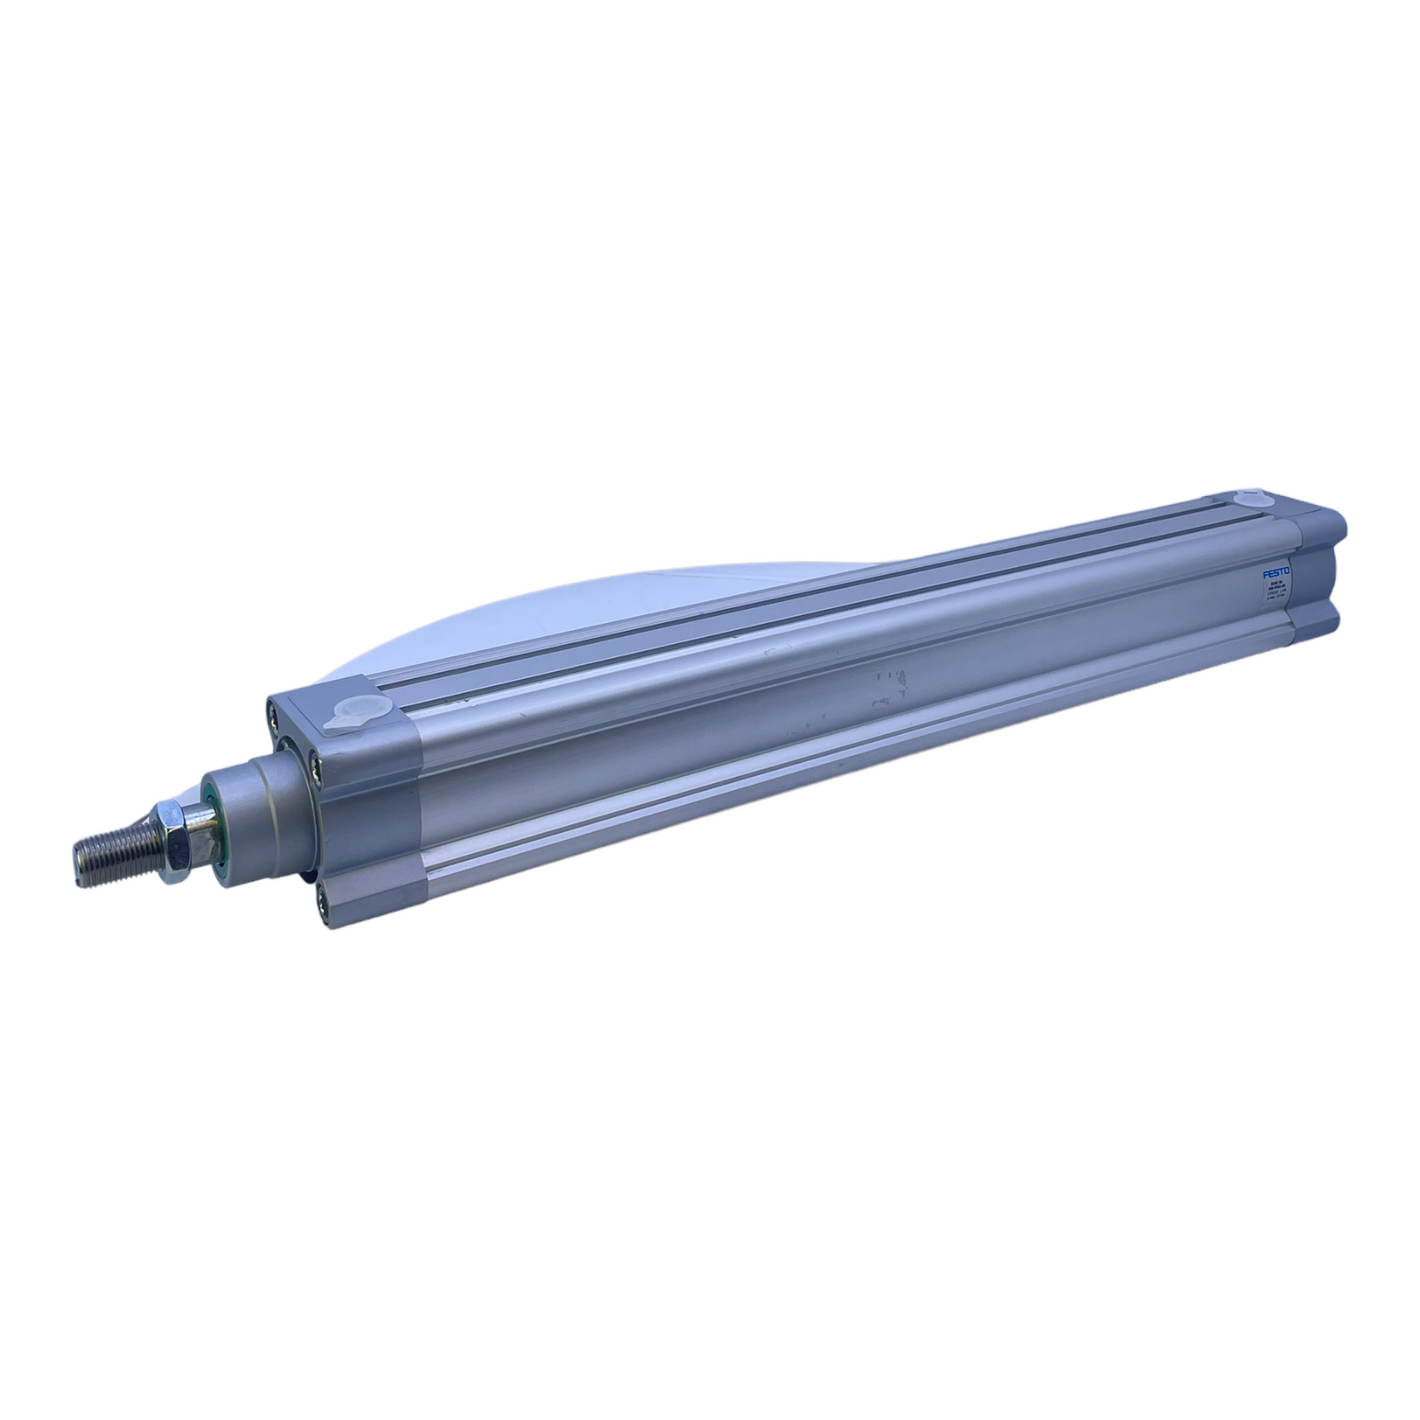 Festo DSBC-50-400-PPSA-N3 standard cylinder 1376313 0.4 to 12bar double-acting